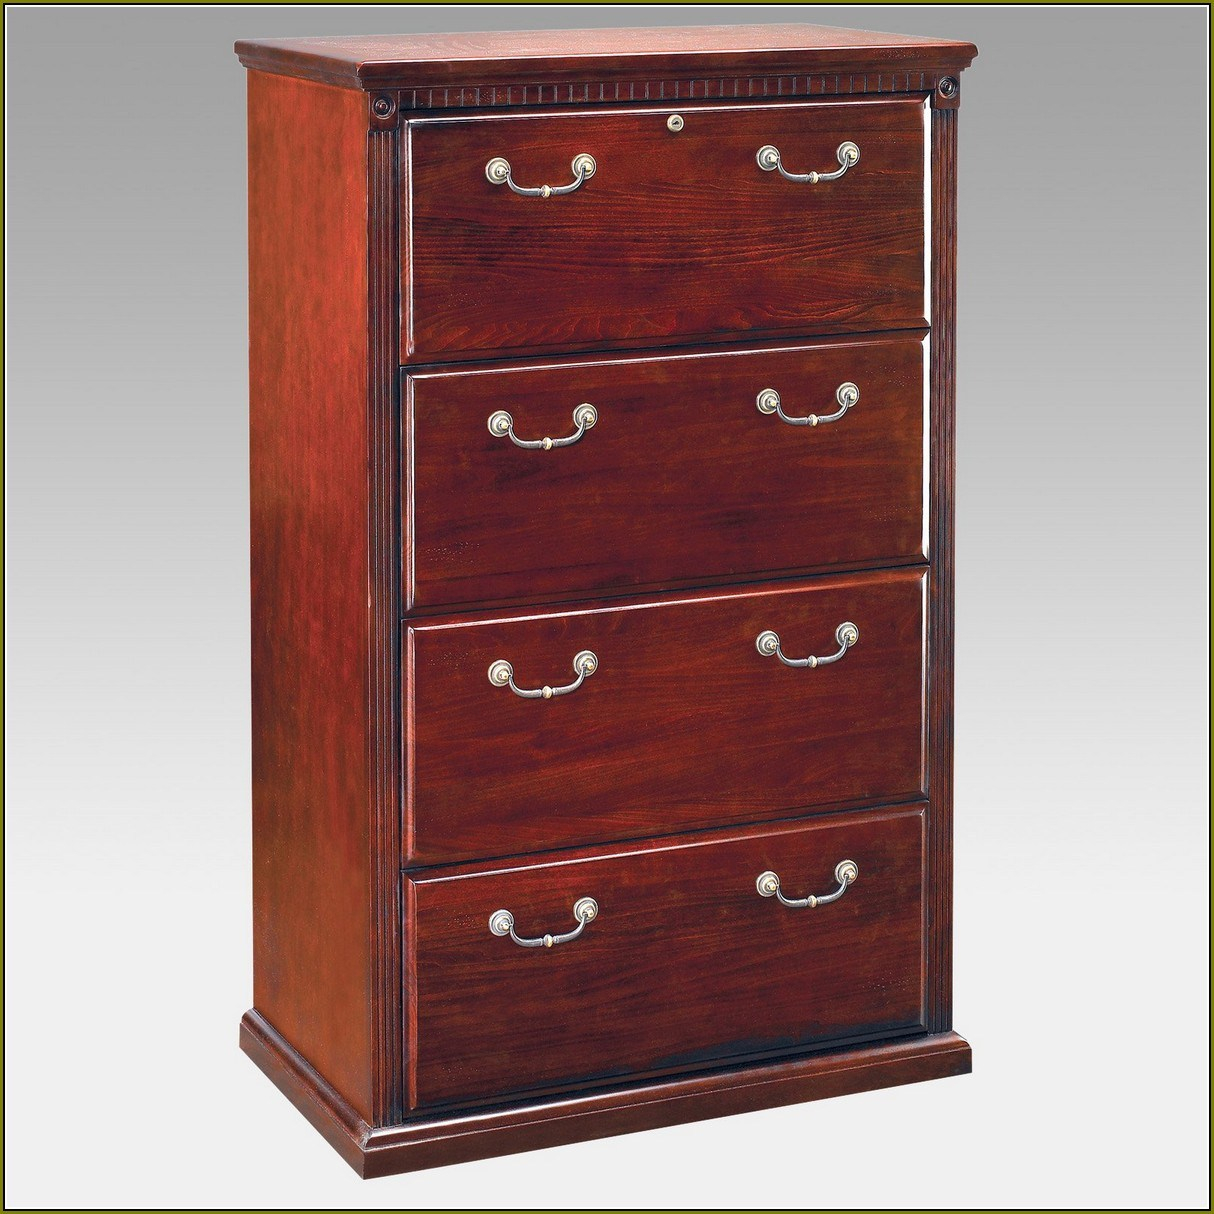 Uberraschend Black Wood File Cabinets Small Mahogany Plans Wooden throughout proportions 1214 X 1214